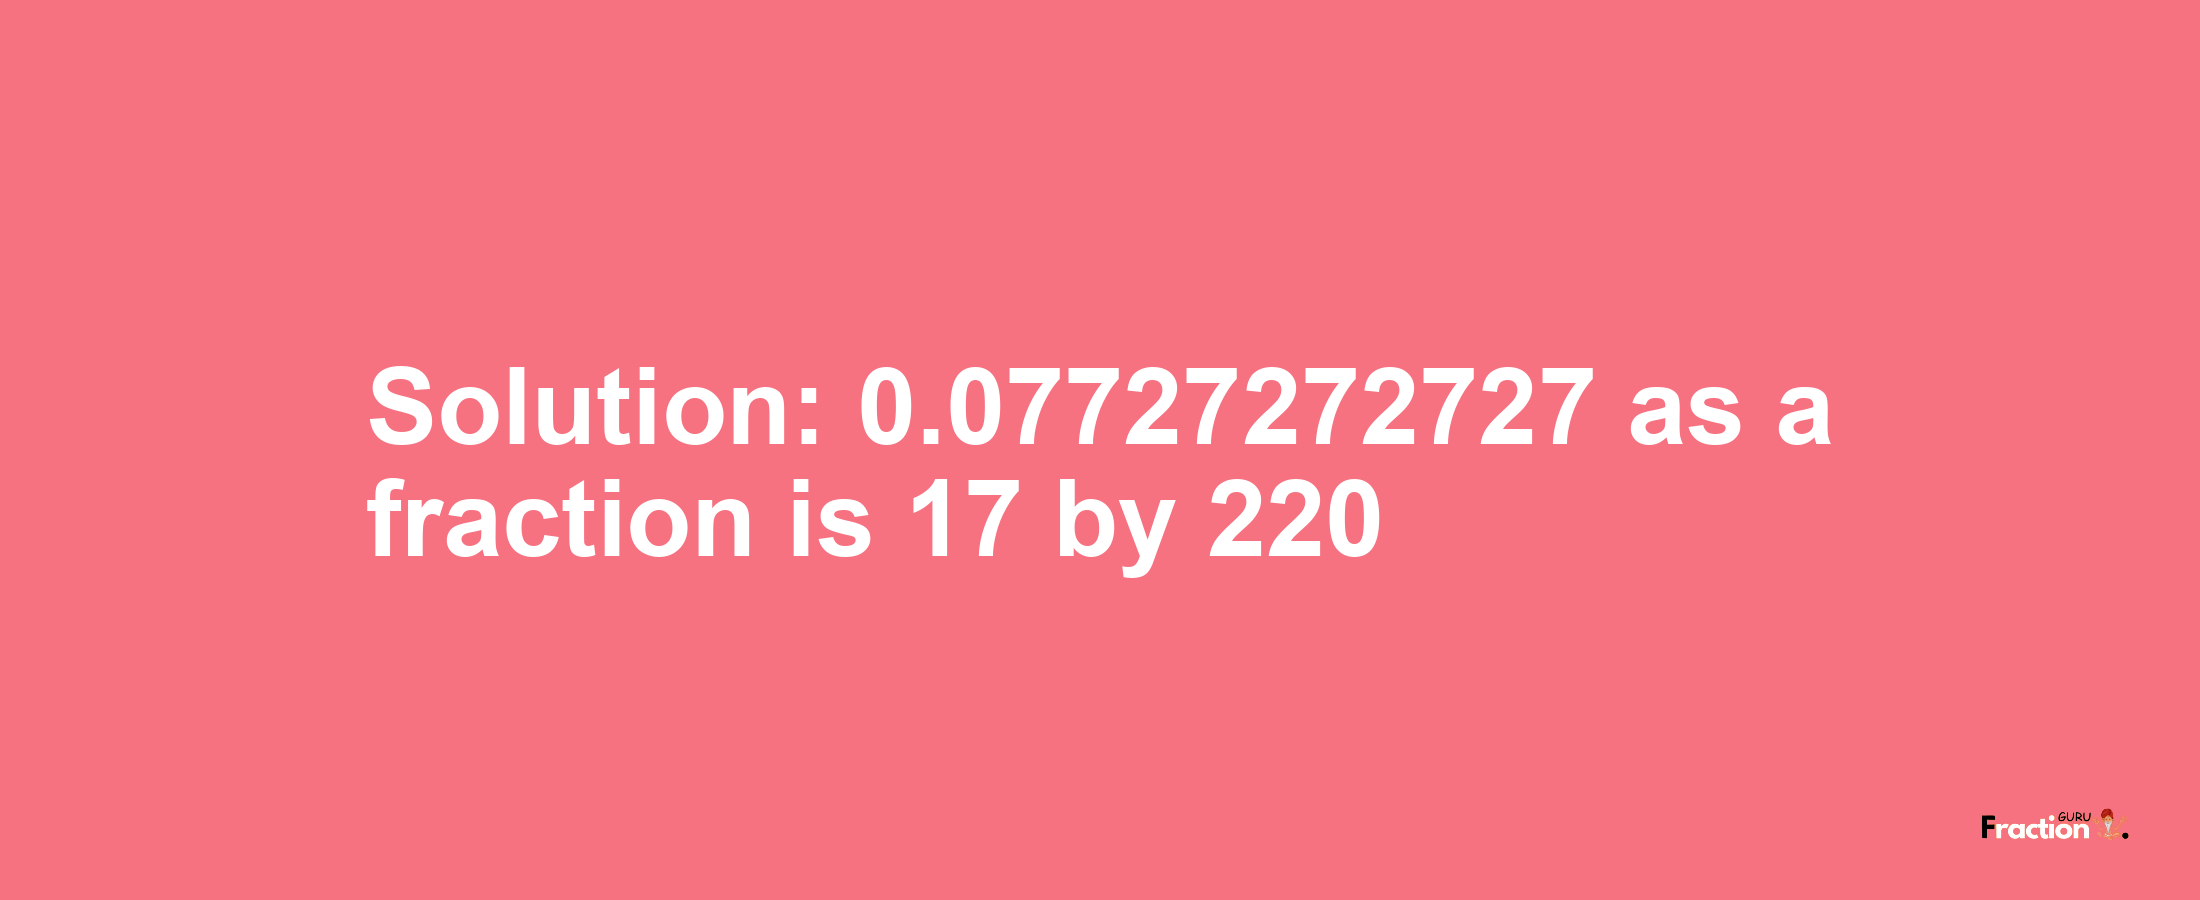 Solution:0.07727272727 as a fraction is 17/220